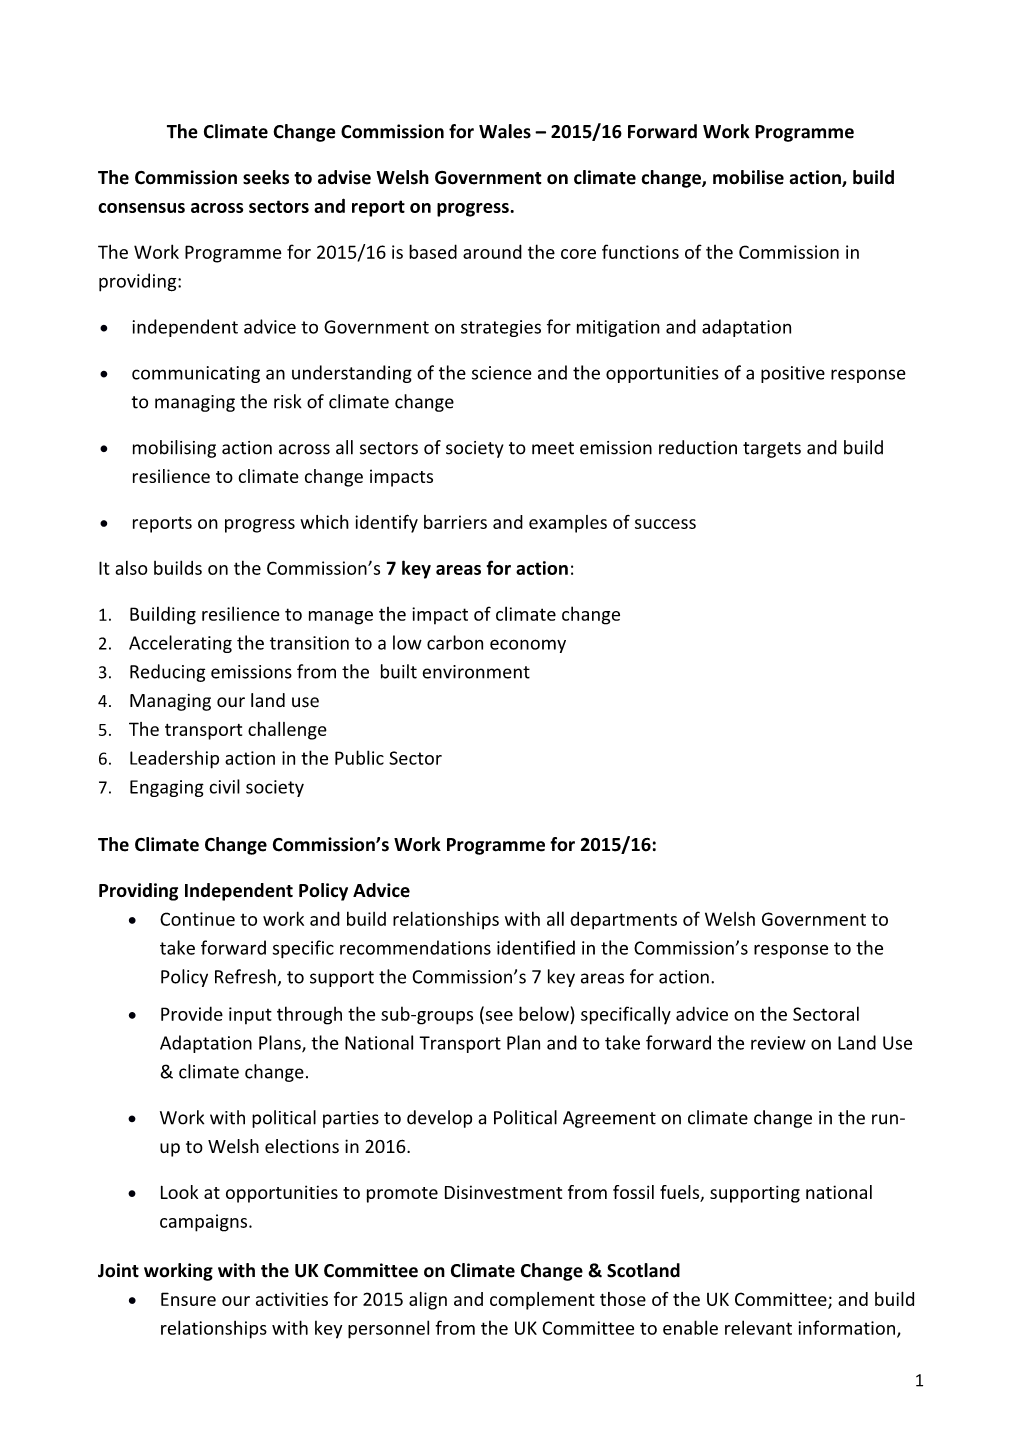 The Climate Change Commission for Wales 2015/16 Forward Work Programme